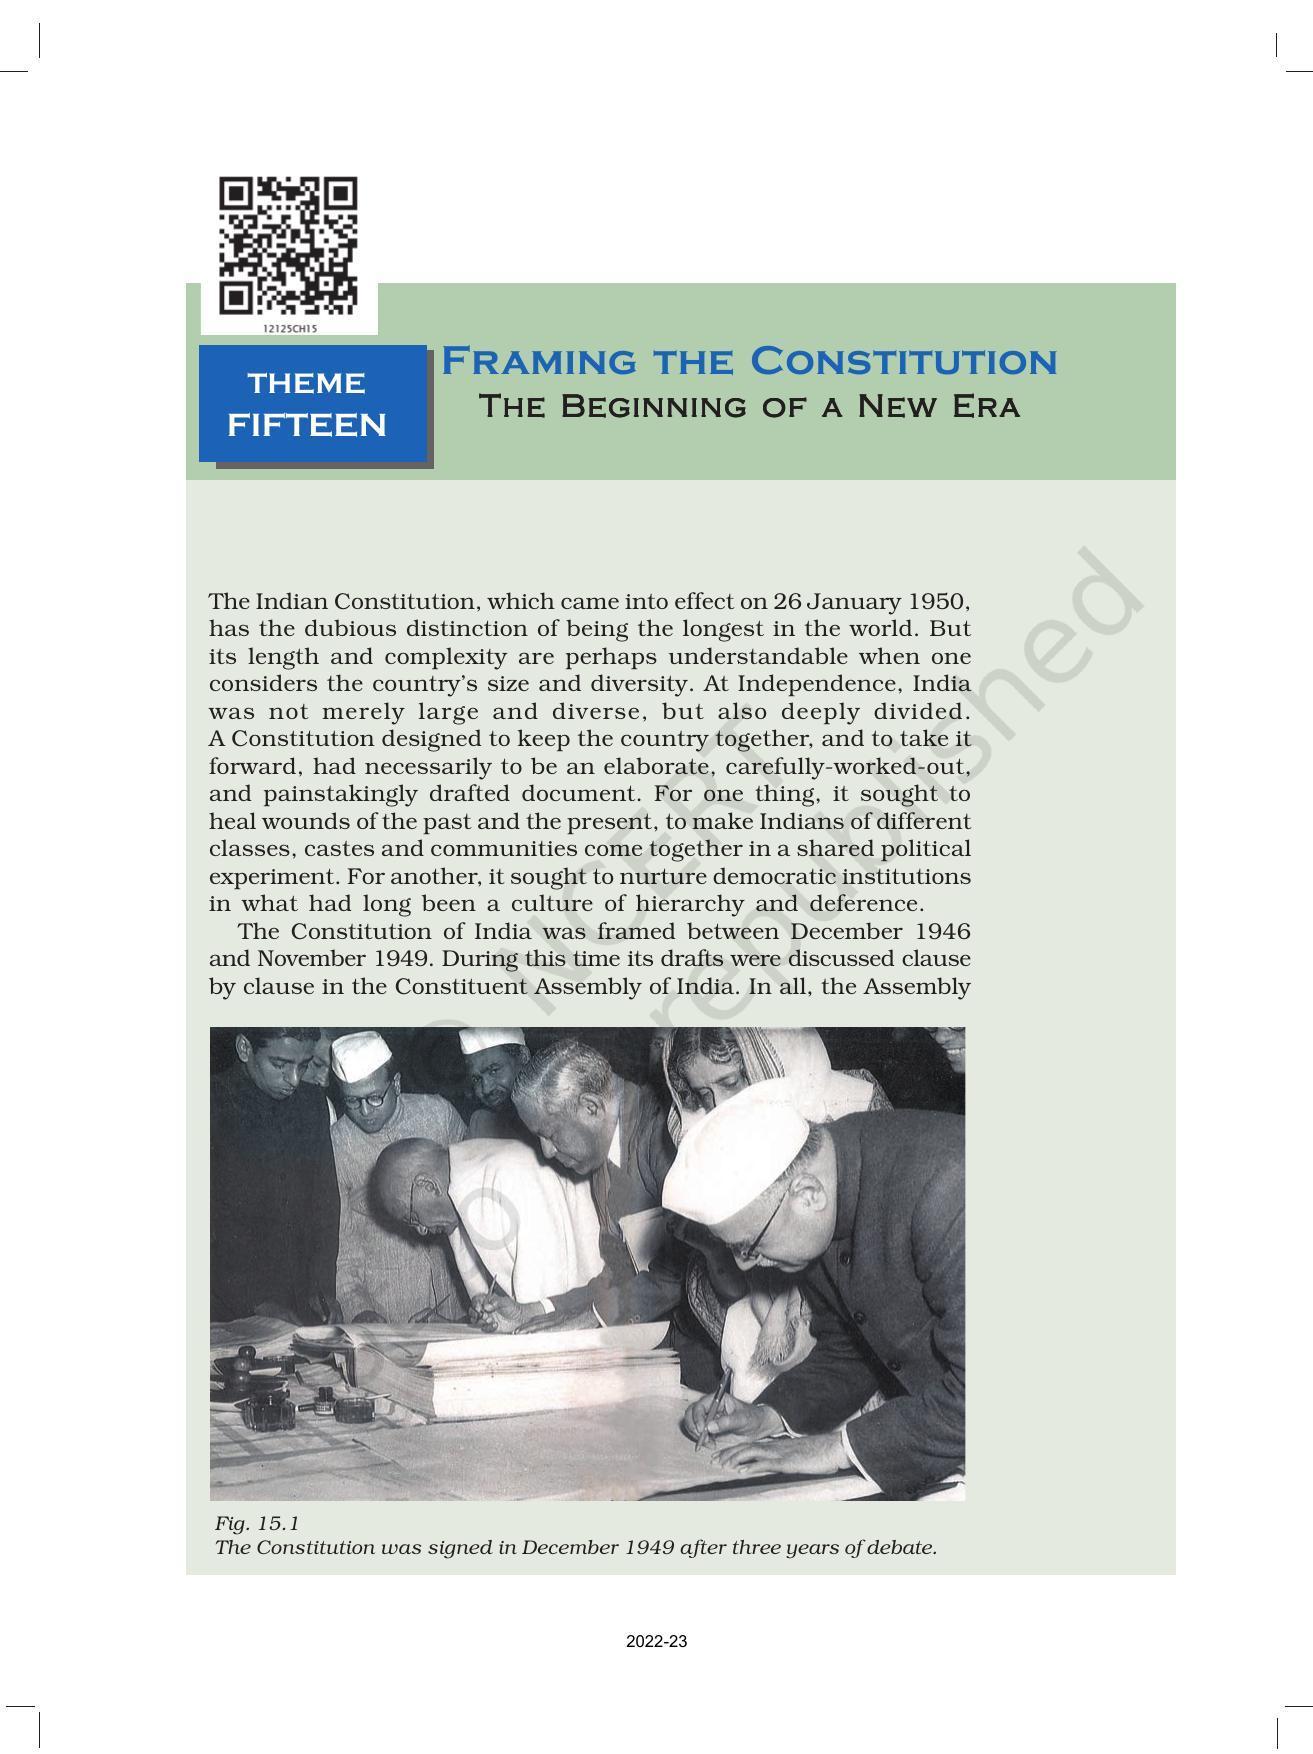 NCERT Book for Class 12 History (Part-III) Chapter 15 Framing and the Constitution - Page 1